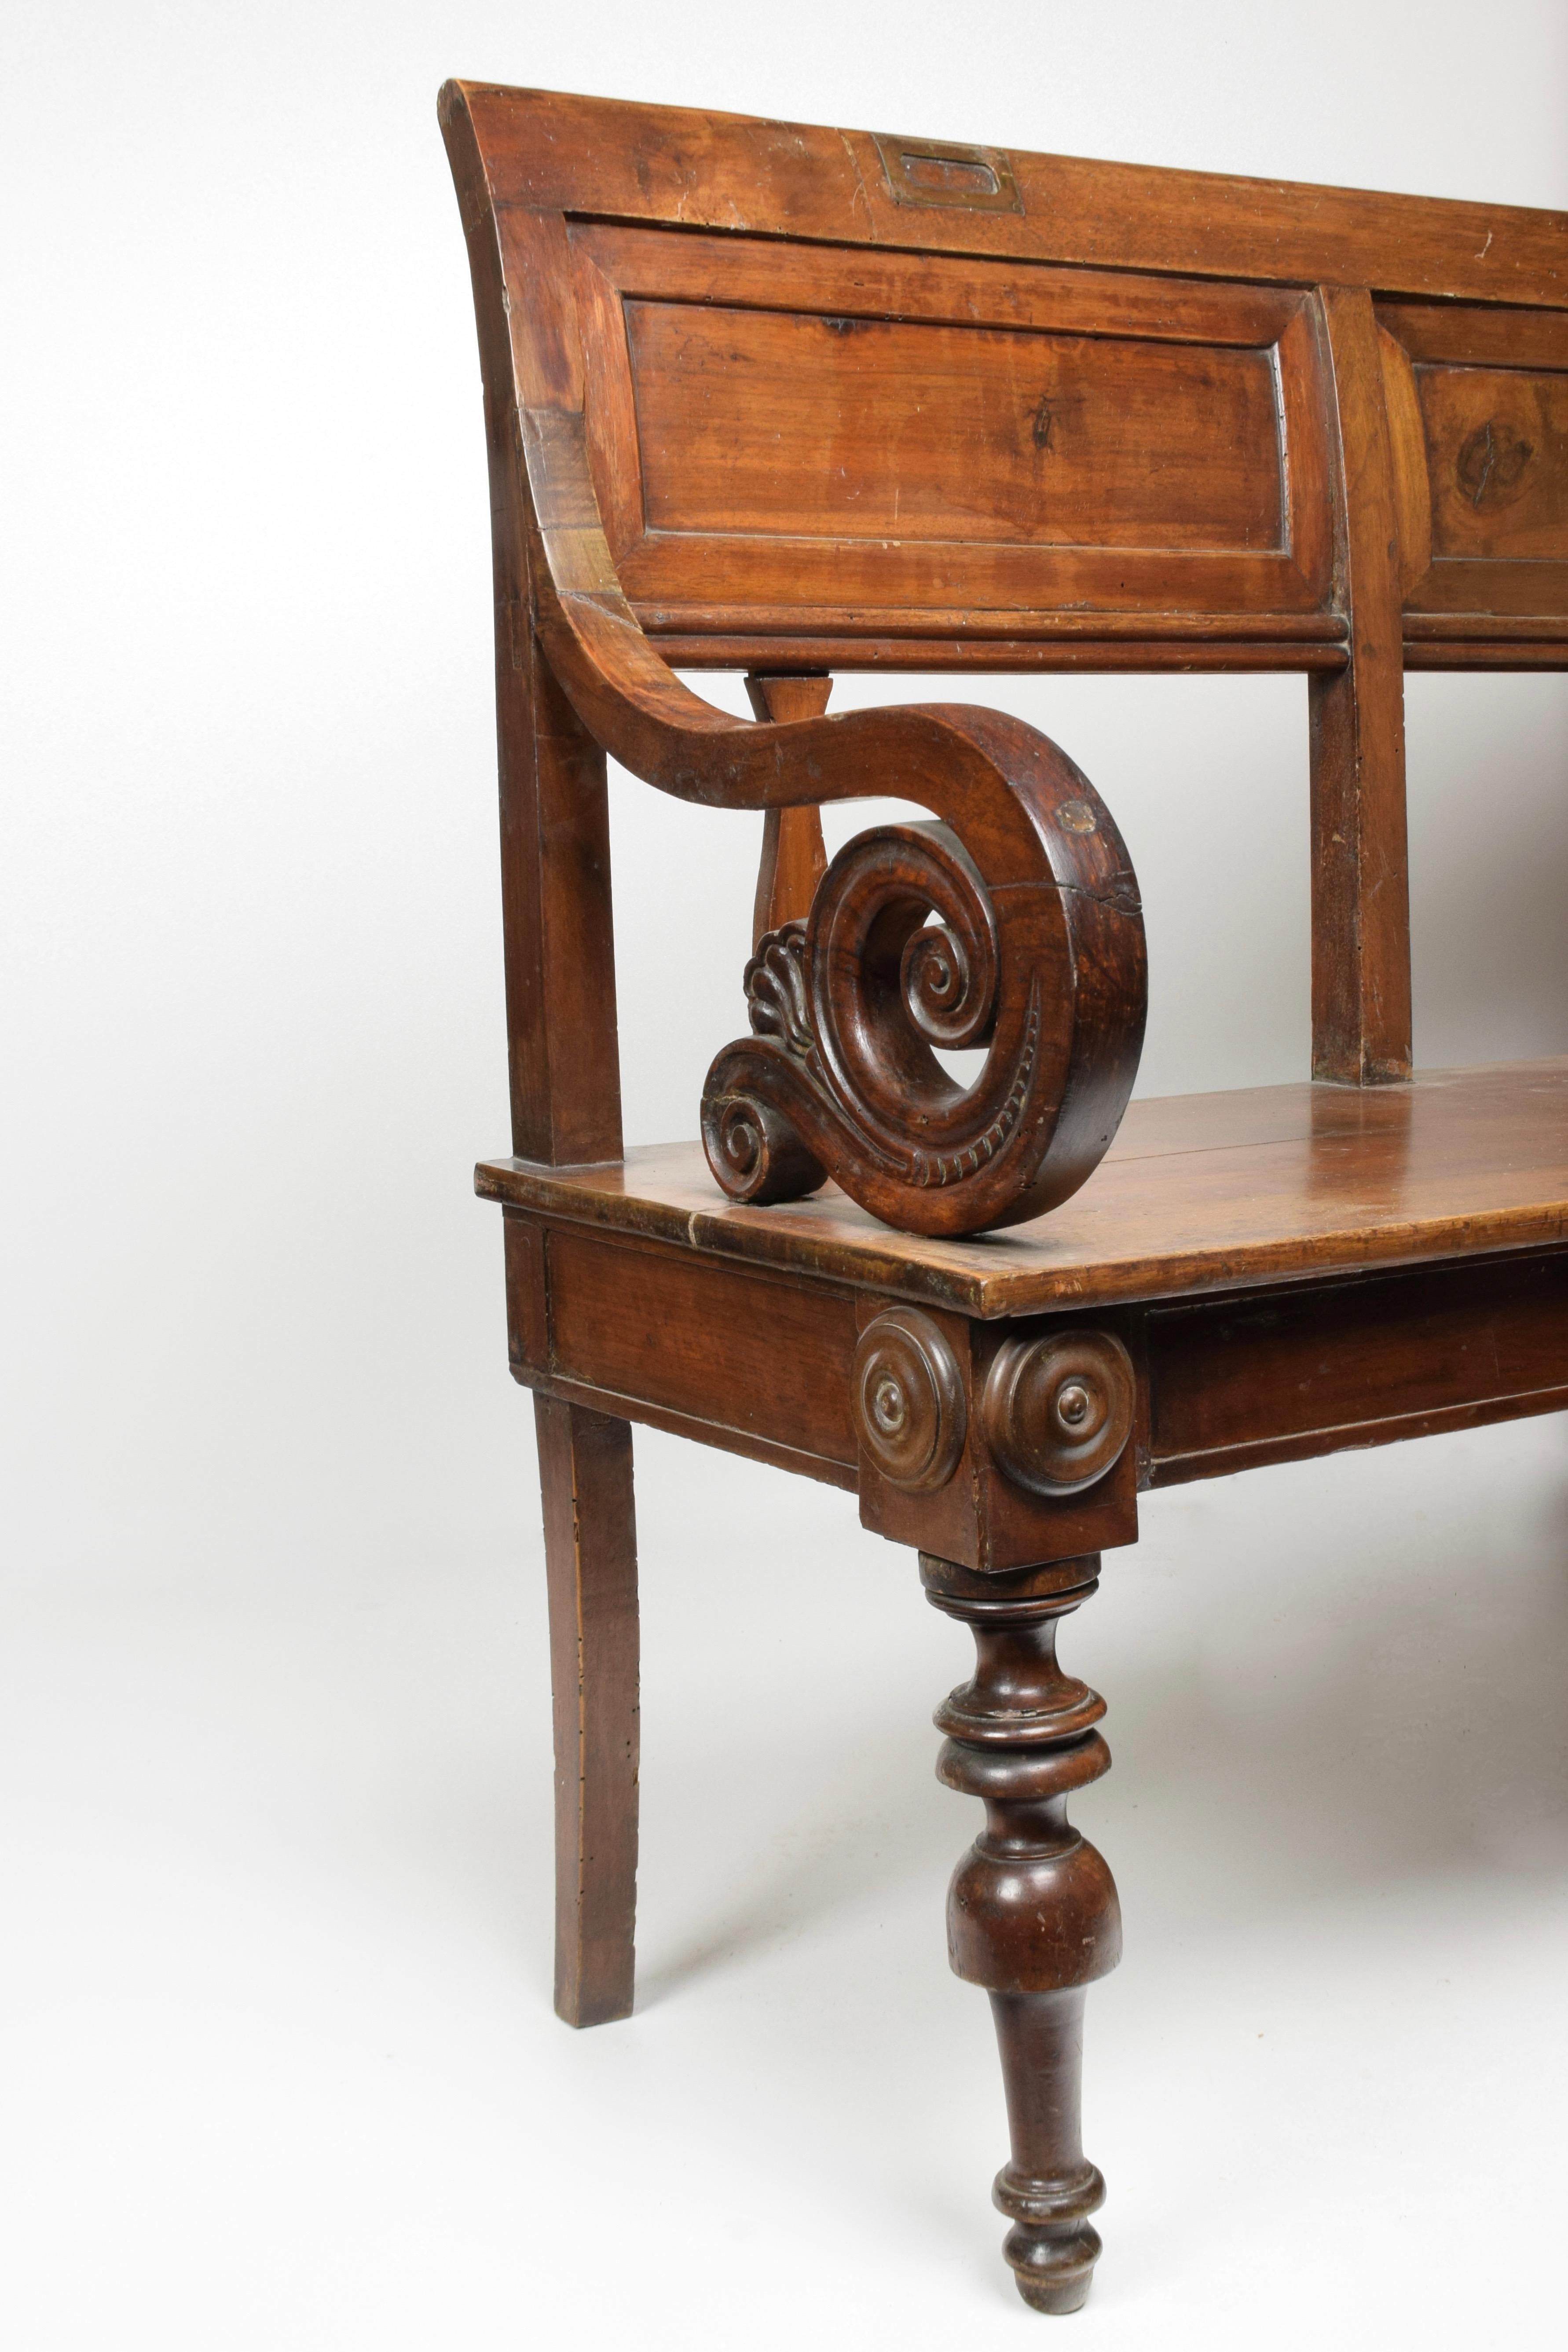 Tuscany, early 19th century
In solid walnut with carved armrests
Dimensions: approx. W 205 x D 43 x H 92 cm. Seat height 43 cm.